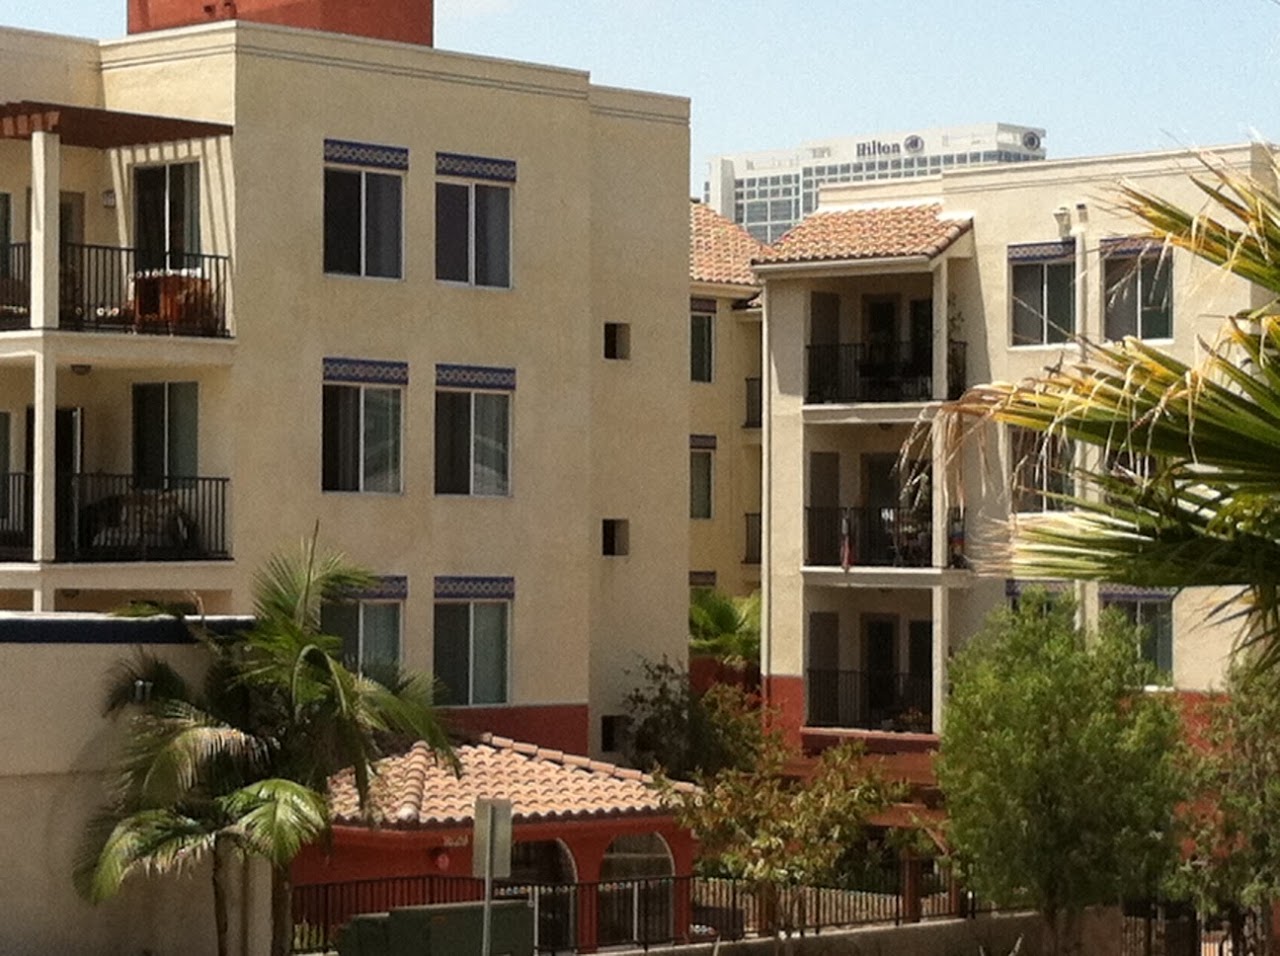 Photo of LOS VIENTOS. Affordable housing located at 1629 NATIONAL AVE SAN DIEGO, CA 92113